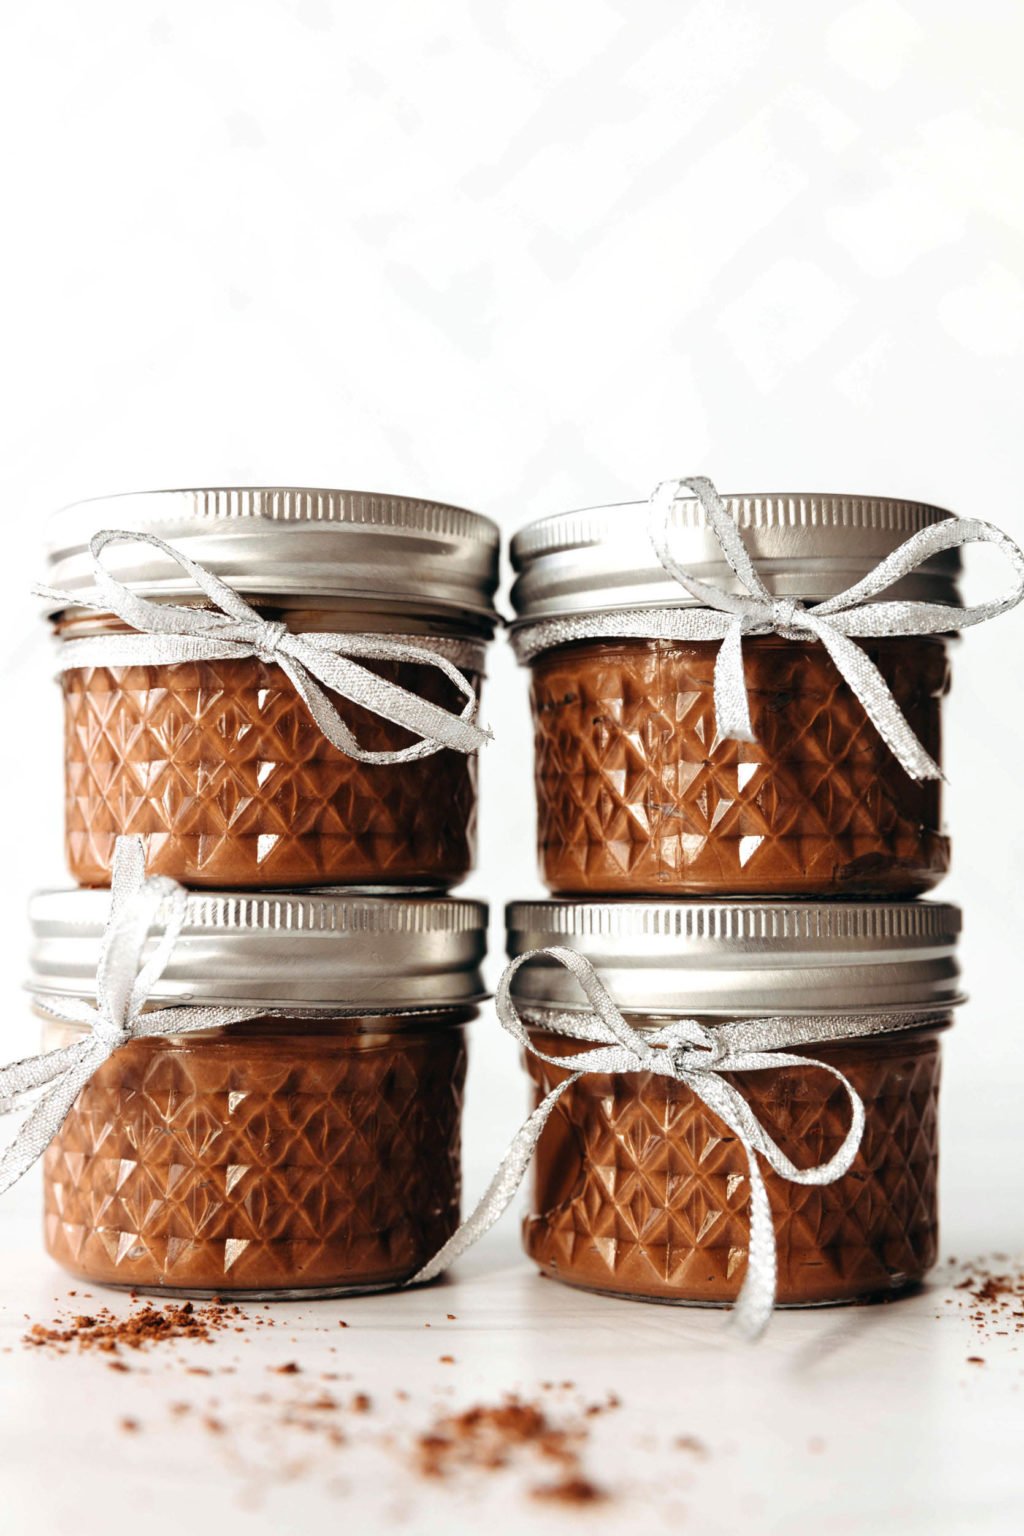 Small, round mason jars have been filled with a chocolate pudding. The jars are stacked against a white backdrop. Each is tied with a festive silver ribbon.